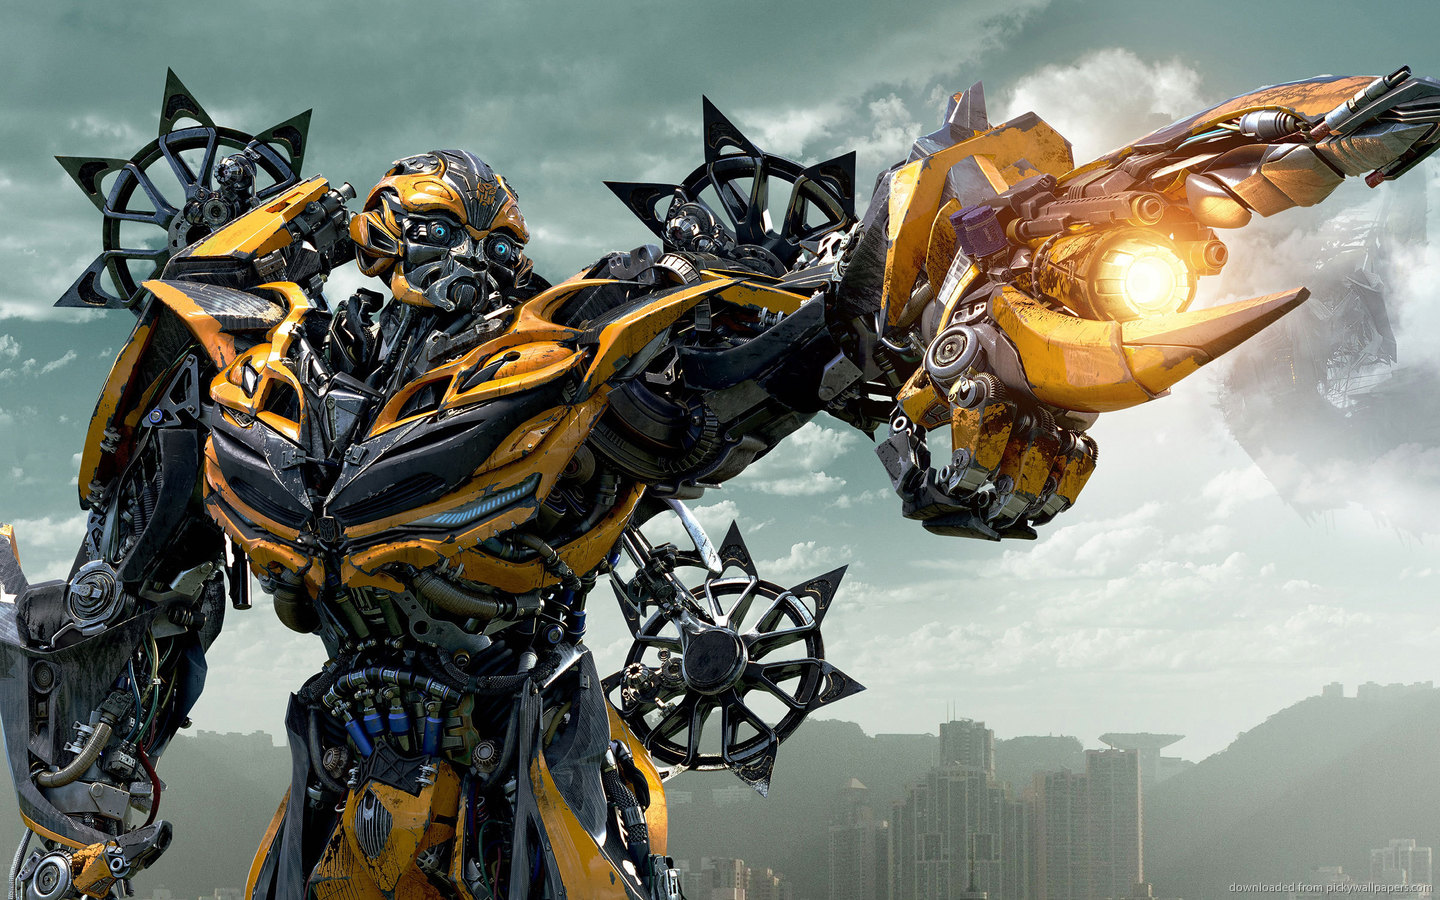 Download 1440x900 Transformers Age Of Extinction Bumblebee Wallpaper